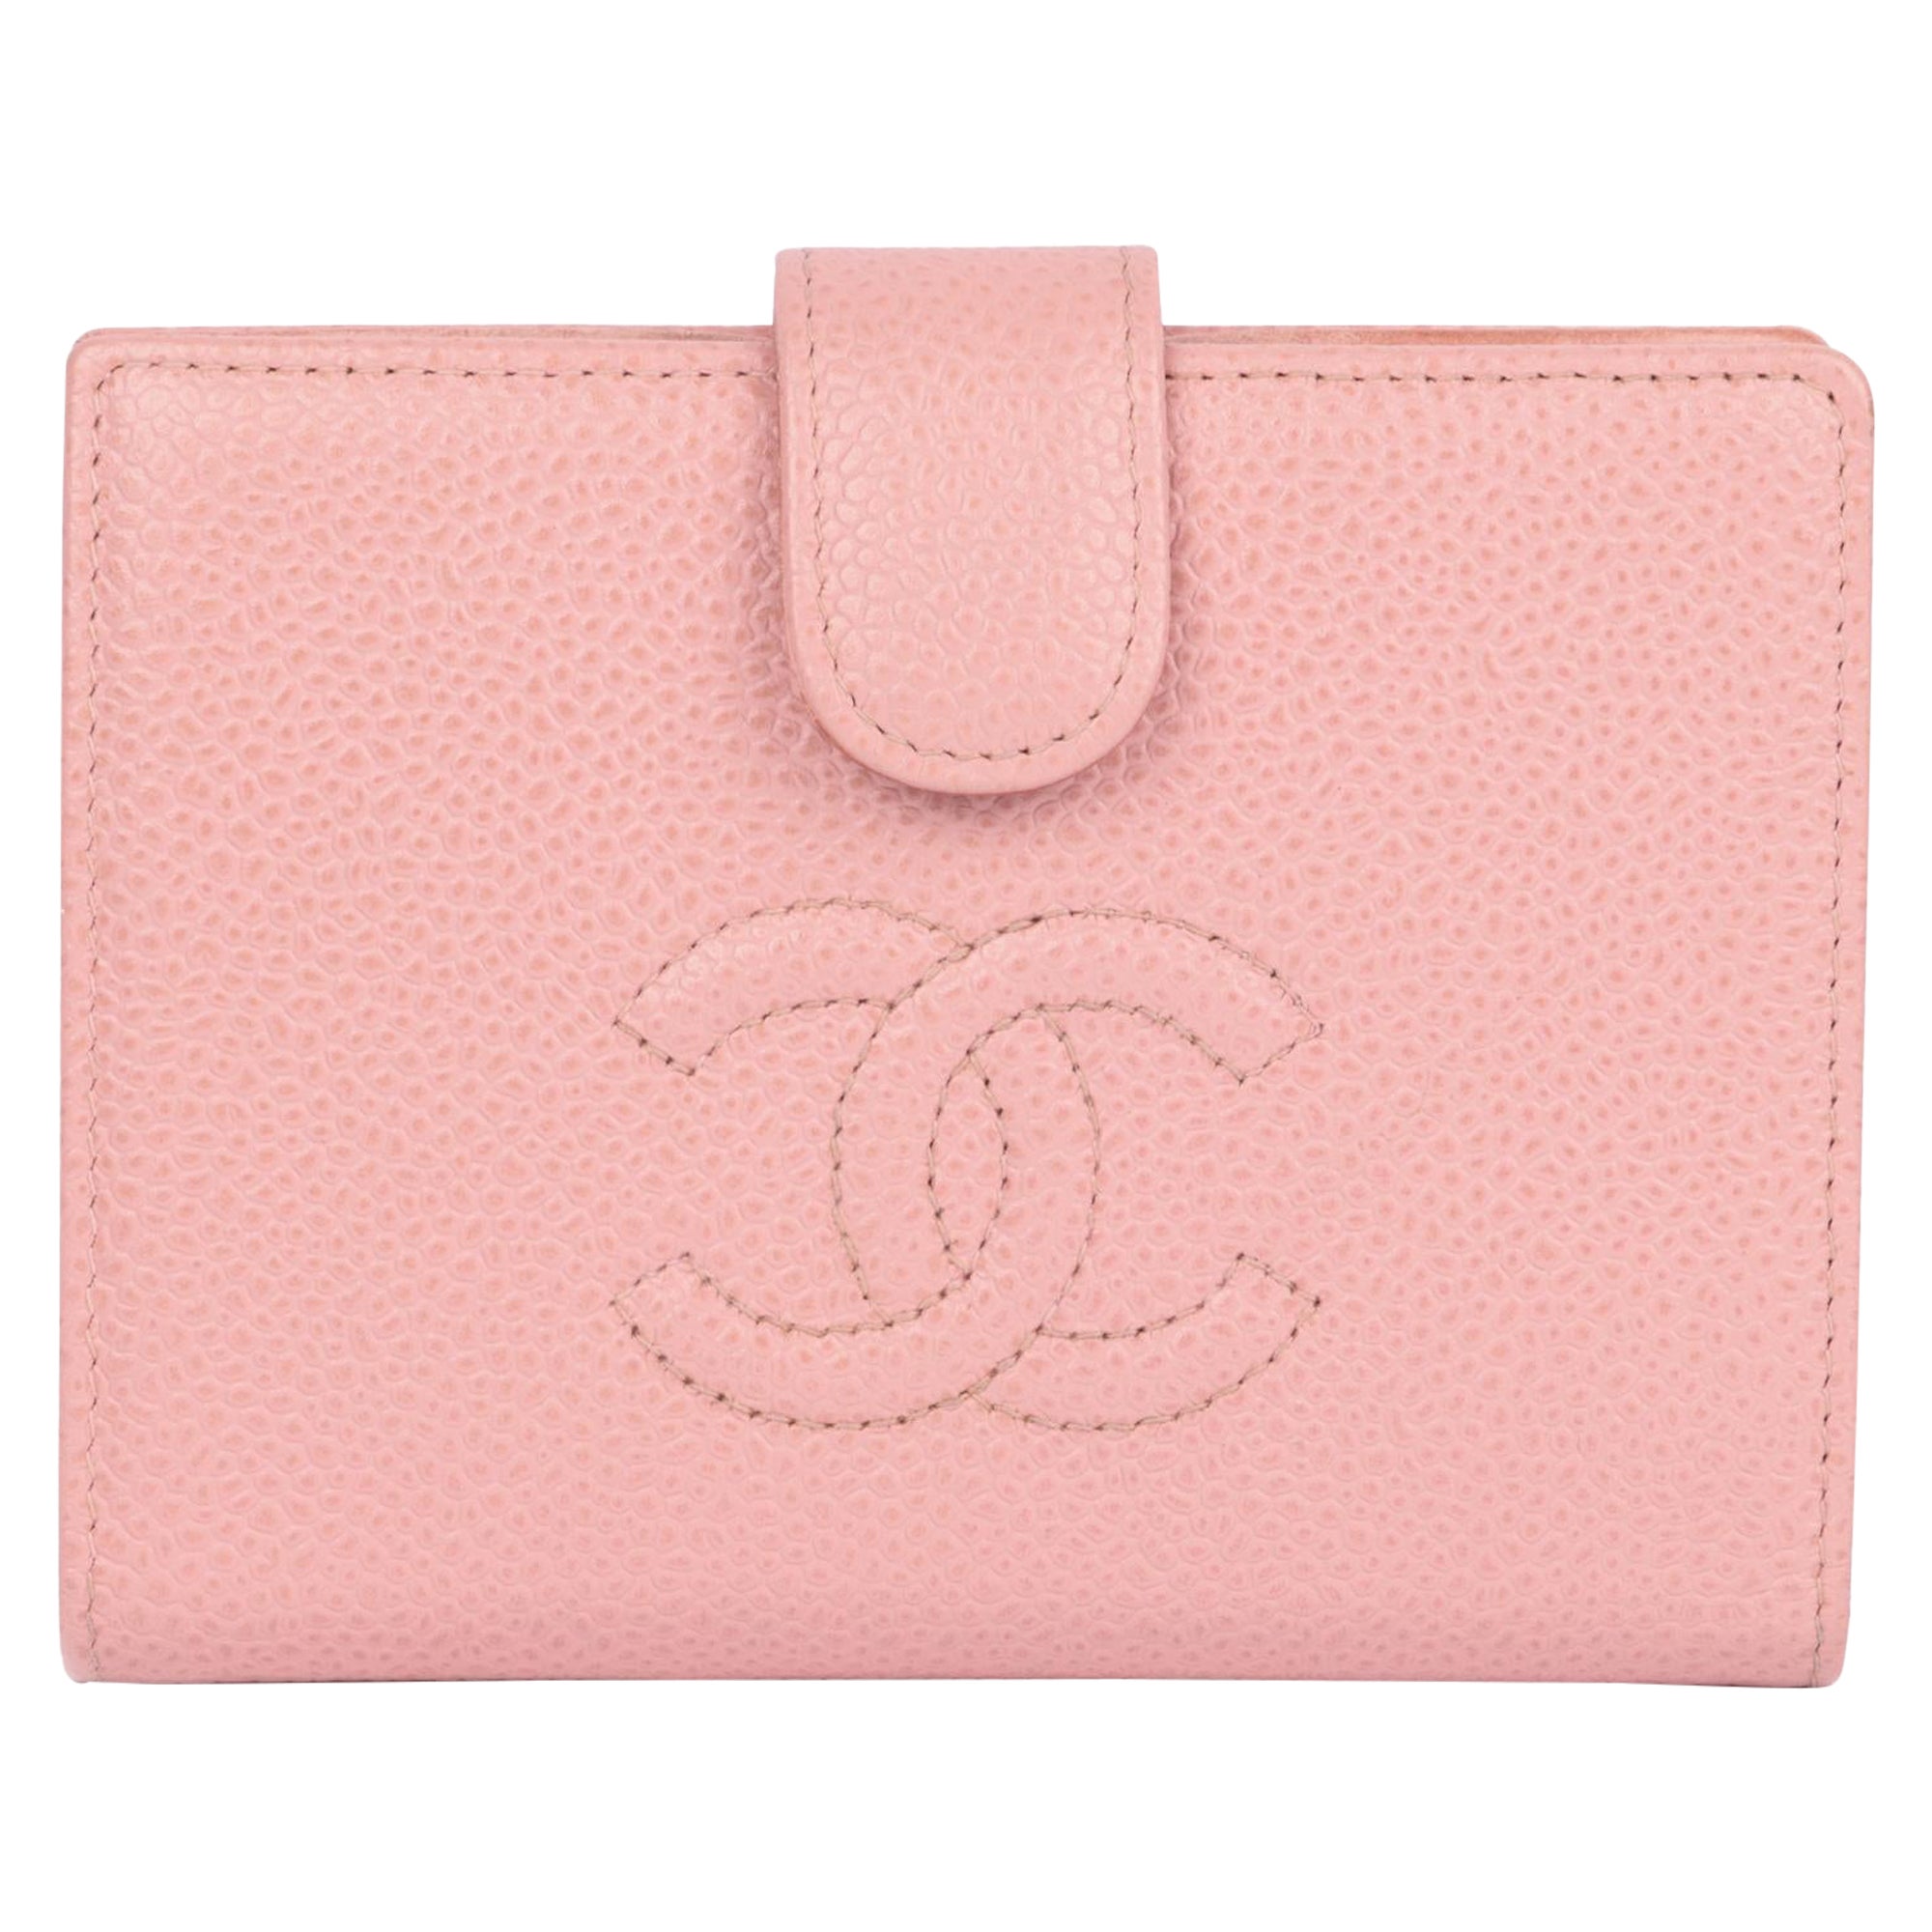 Chanel Pink Caviar Lambskin Leather Timeless Compact Wallet For Sale